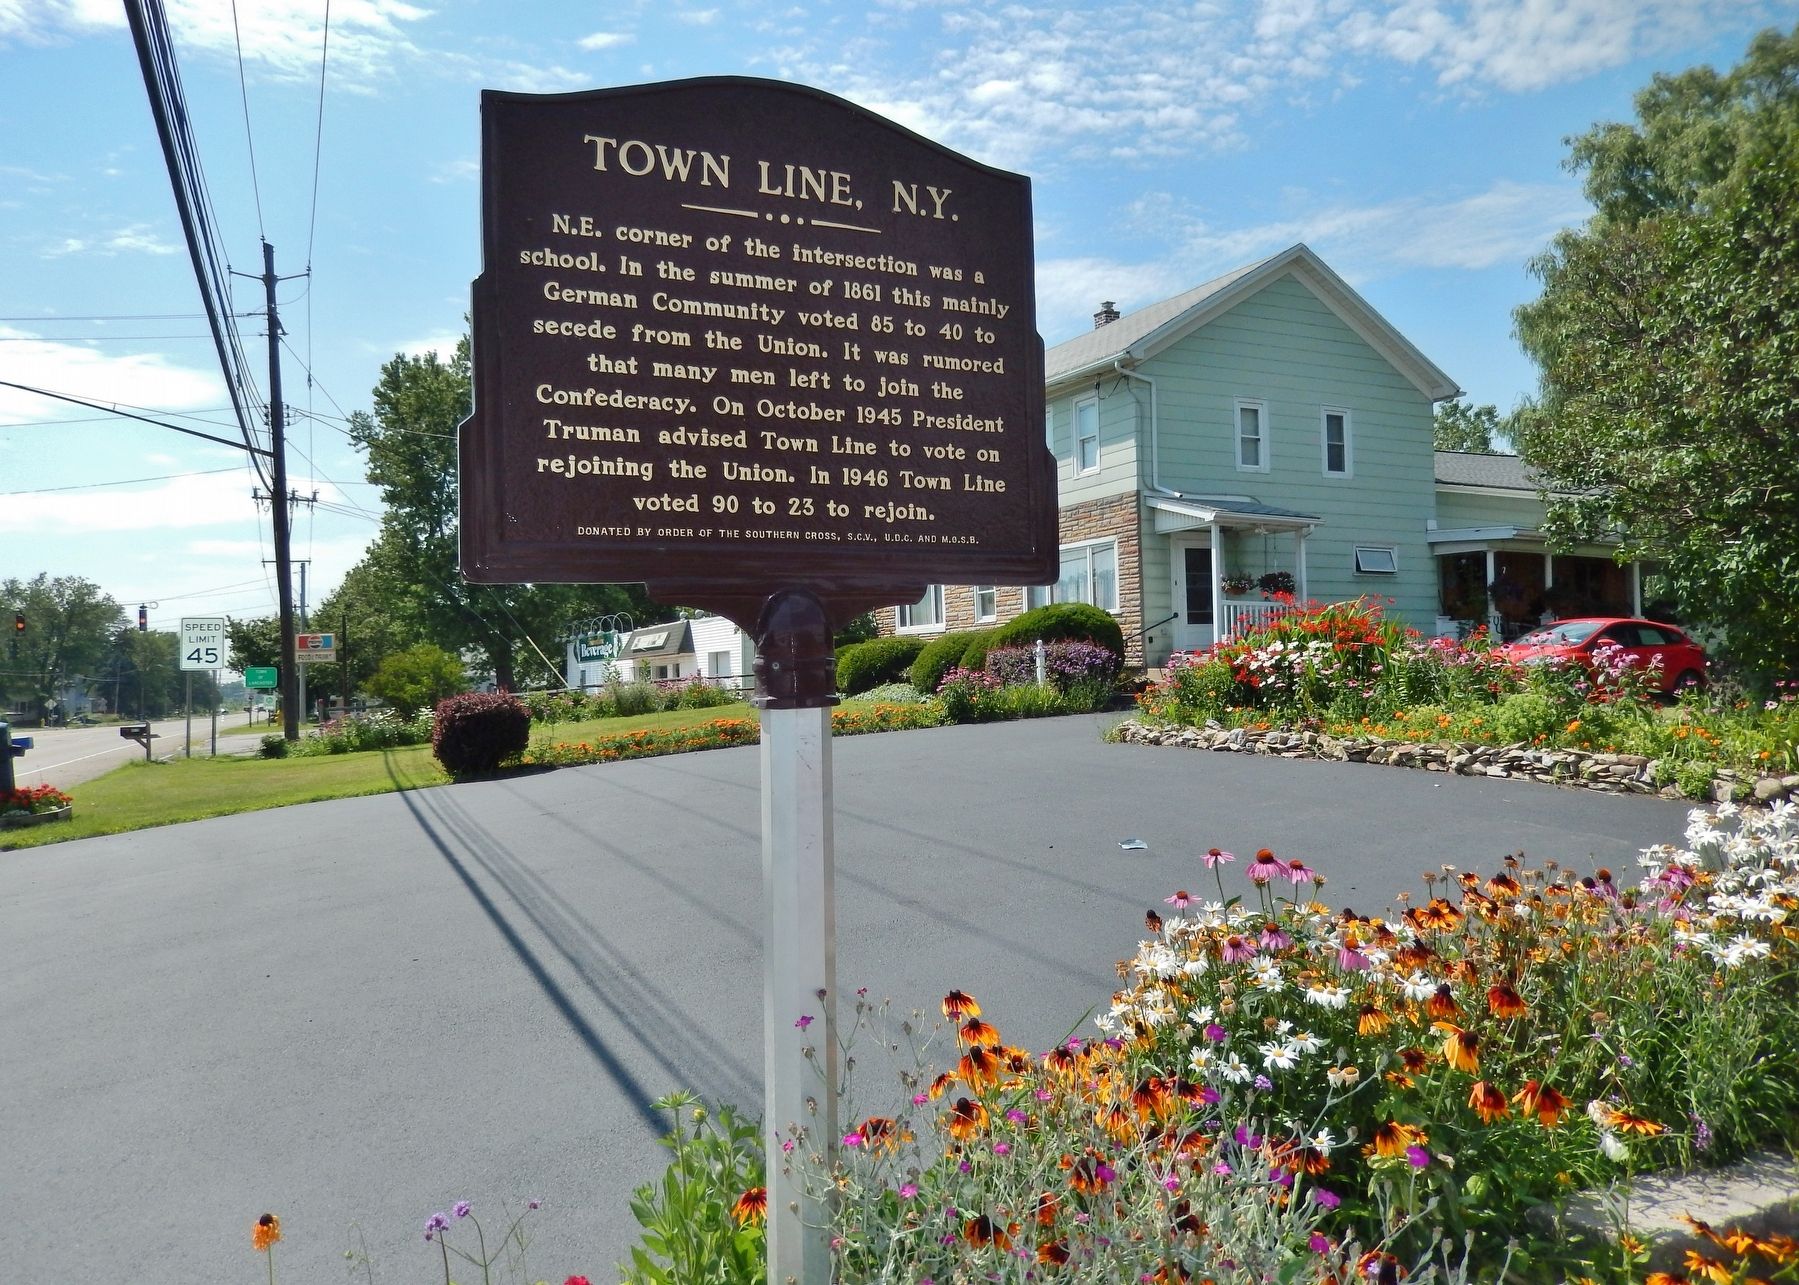 Town Line, N.Y. Marker (<i>wide view; looking west along US Highway 20</i>) image. Click for full size.